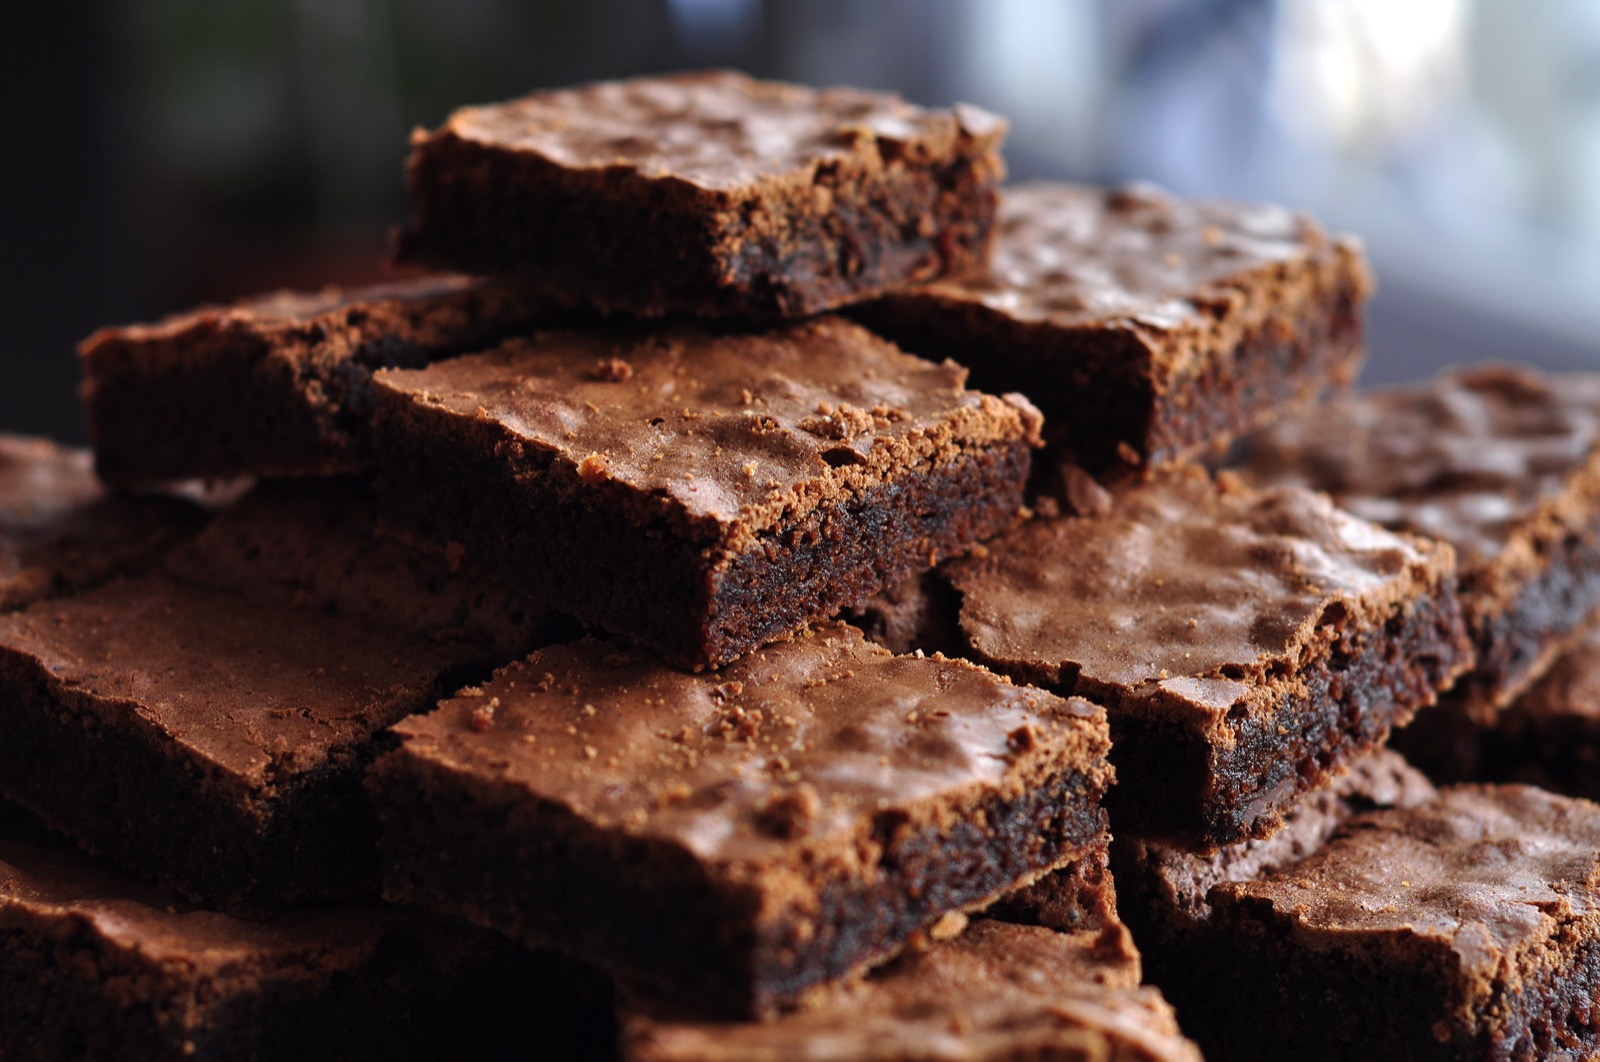 Are You an Older or Younger Person? 🥨 Choose Some Typical Snacks and We’ll Guess Chocolate brownies